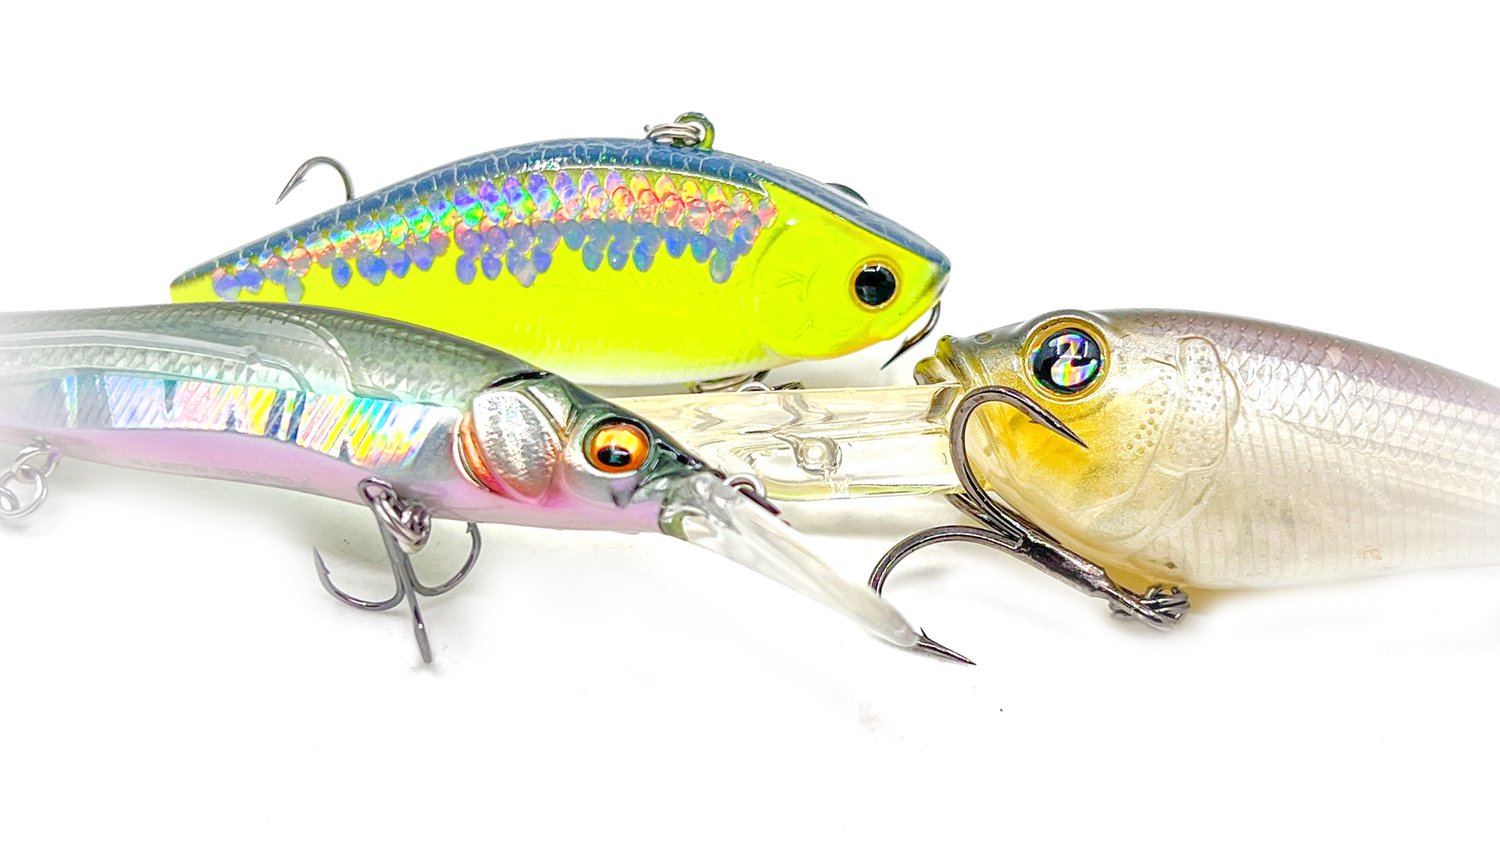 Top 5 Baits For August Bass Fishing! — Tactical Bassin' - Bass Fishing Blog